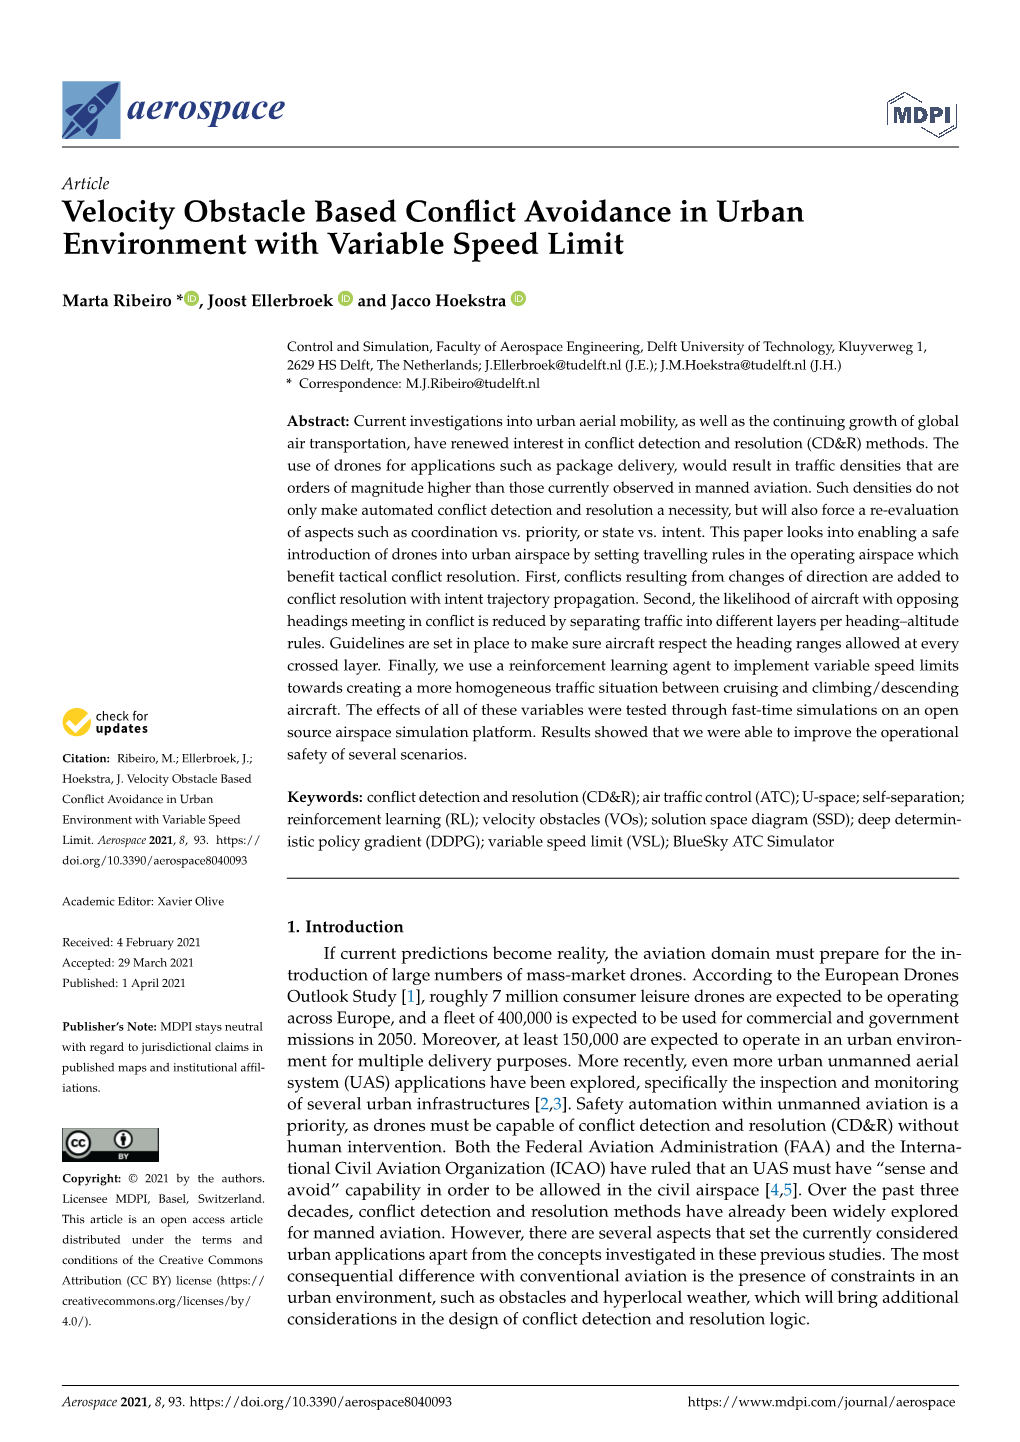 Velocity Obstacle Based Conflict Avoidance in Urban Environment